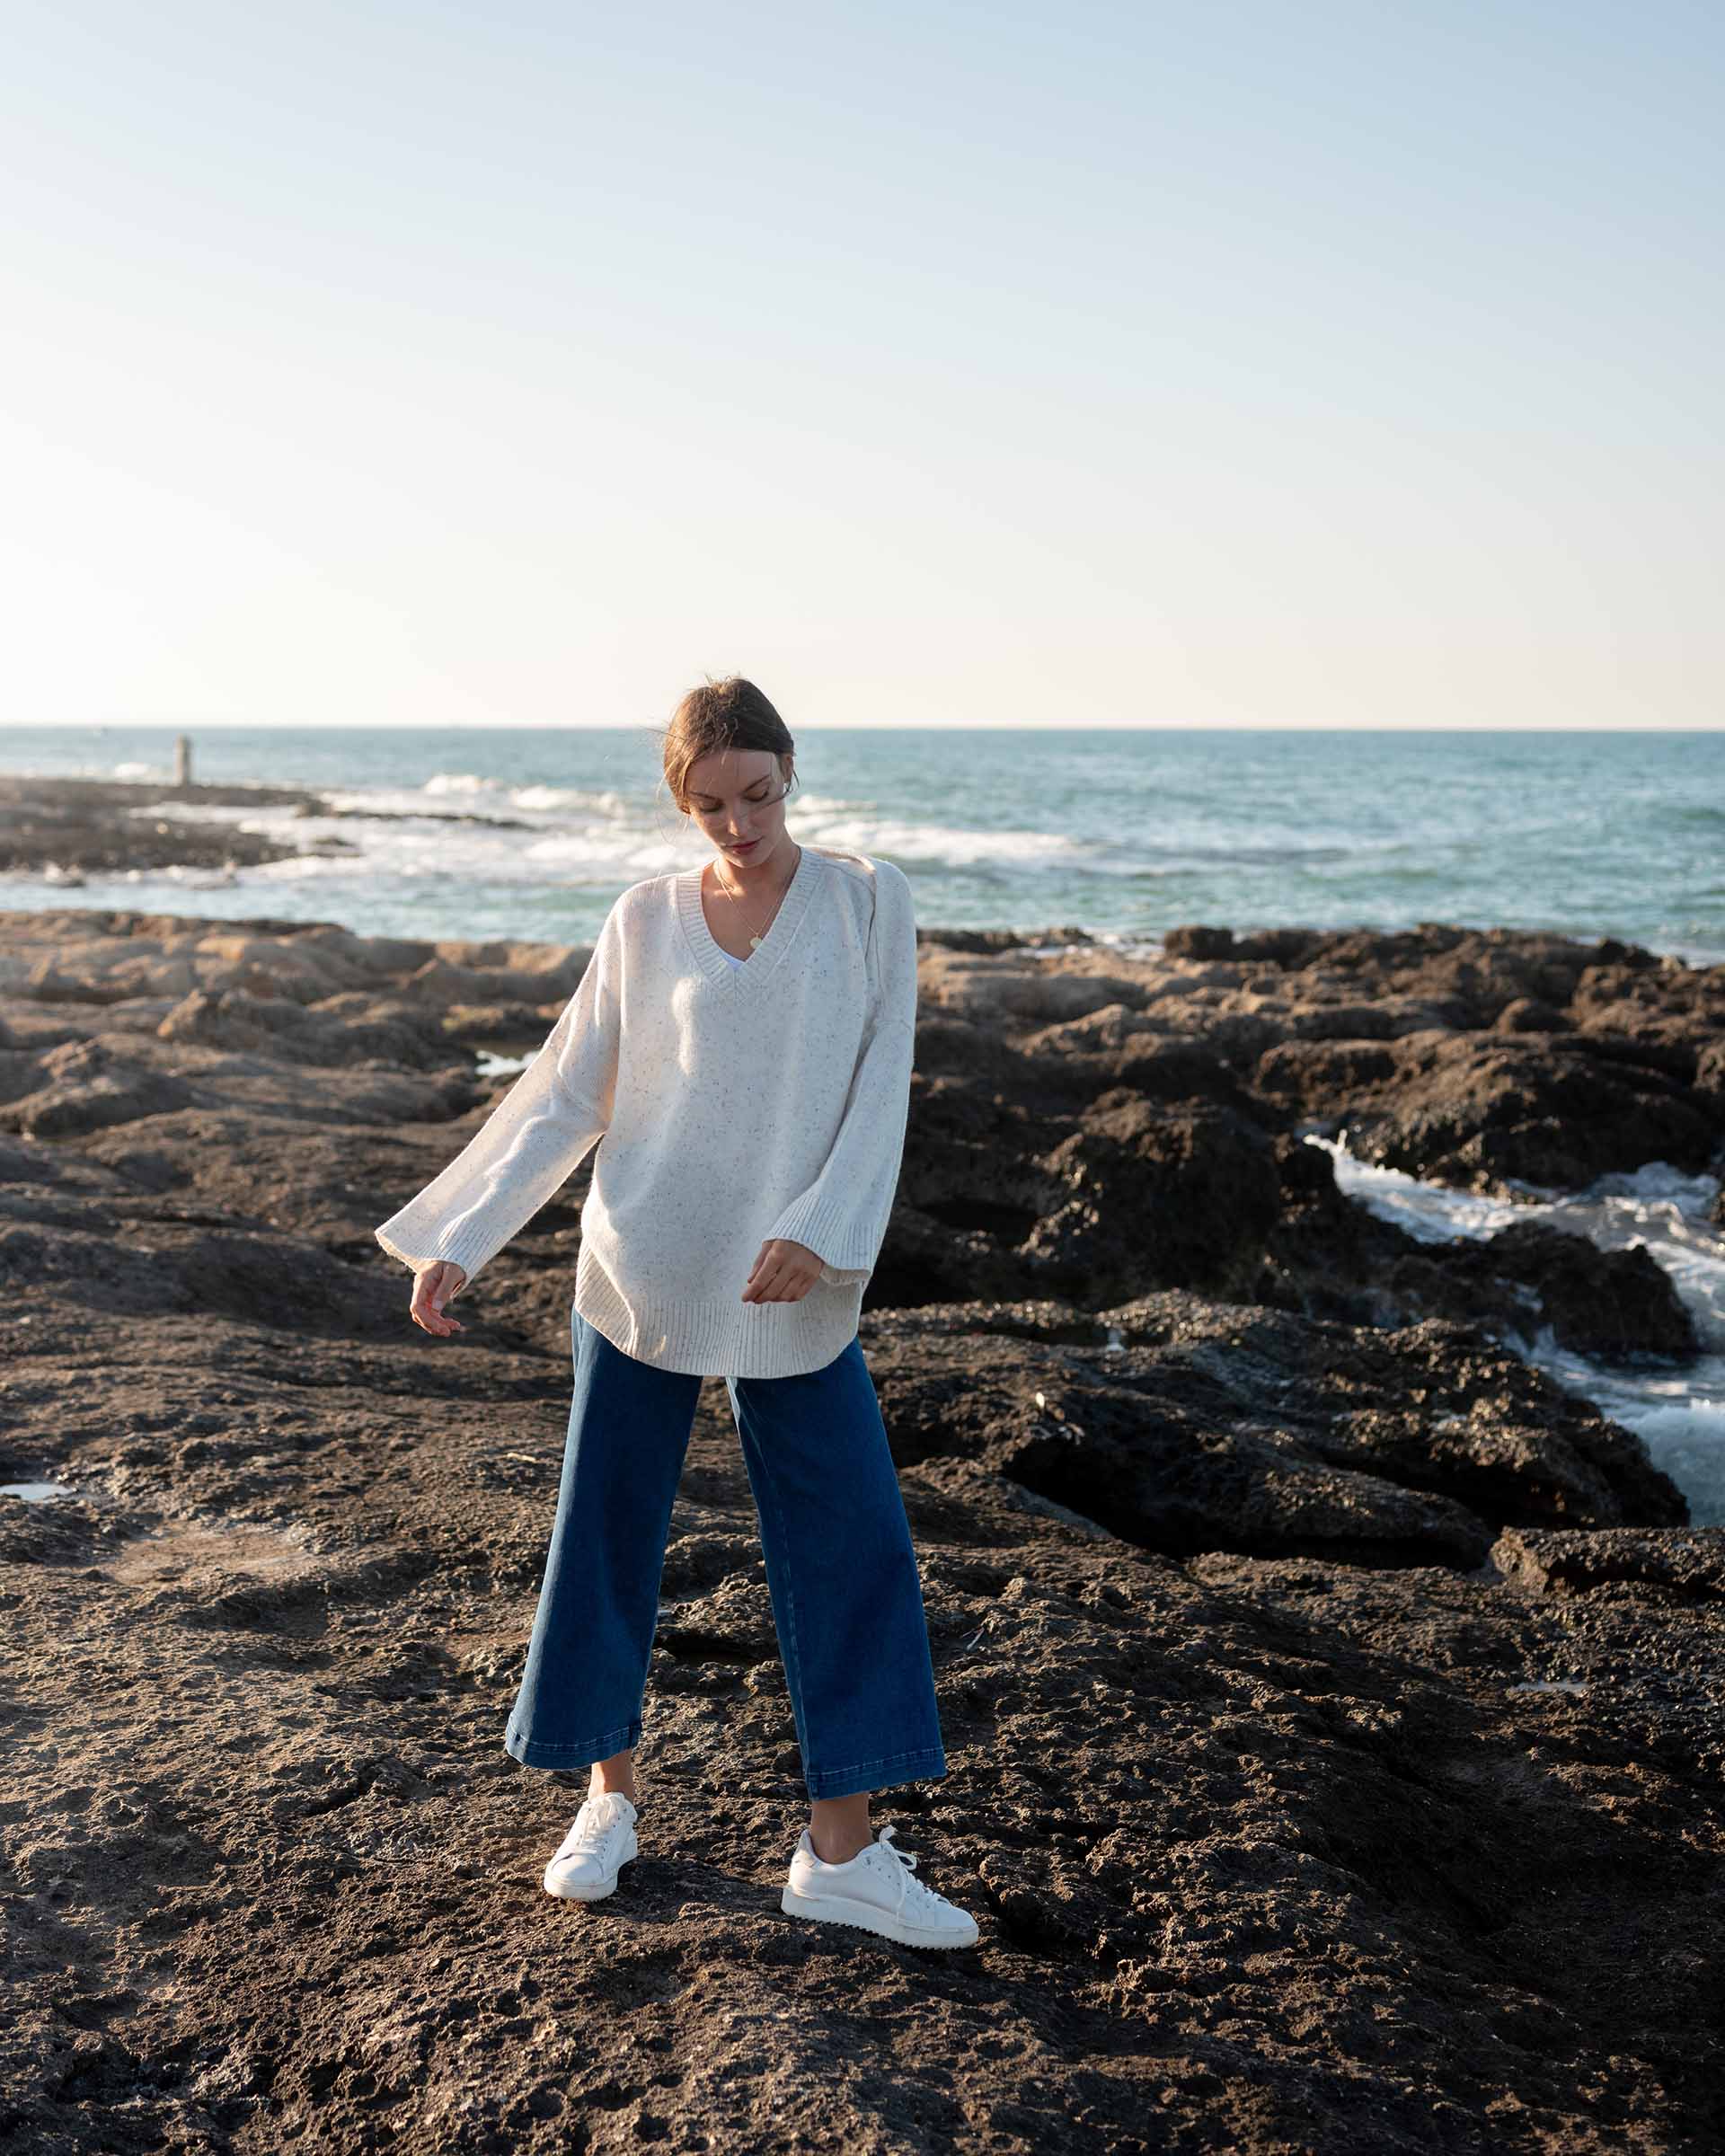 woman wearing mersea montauk v-neck sweater with wide sleeves in cream color standing on rocky beach near water